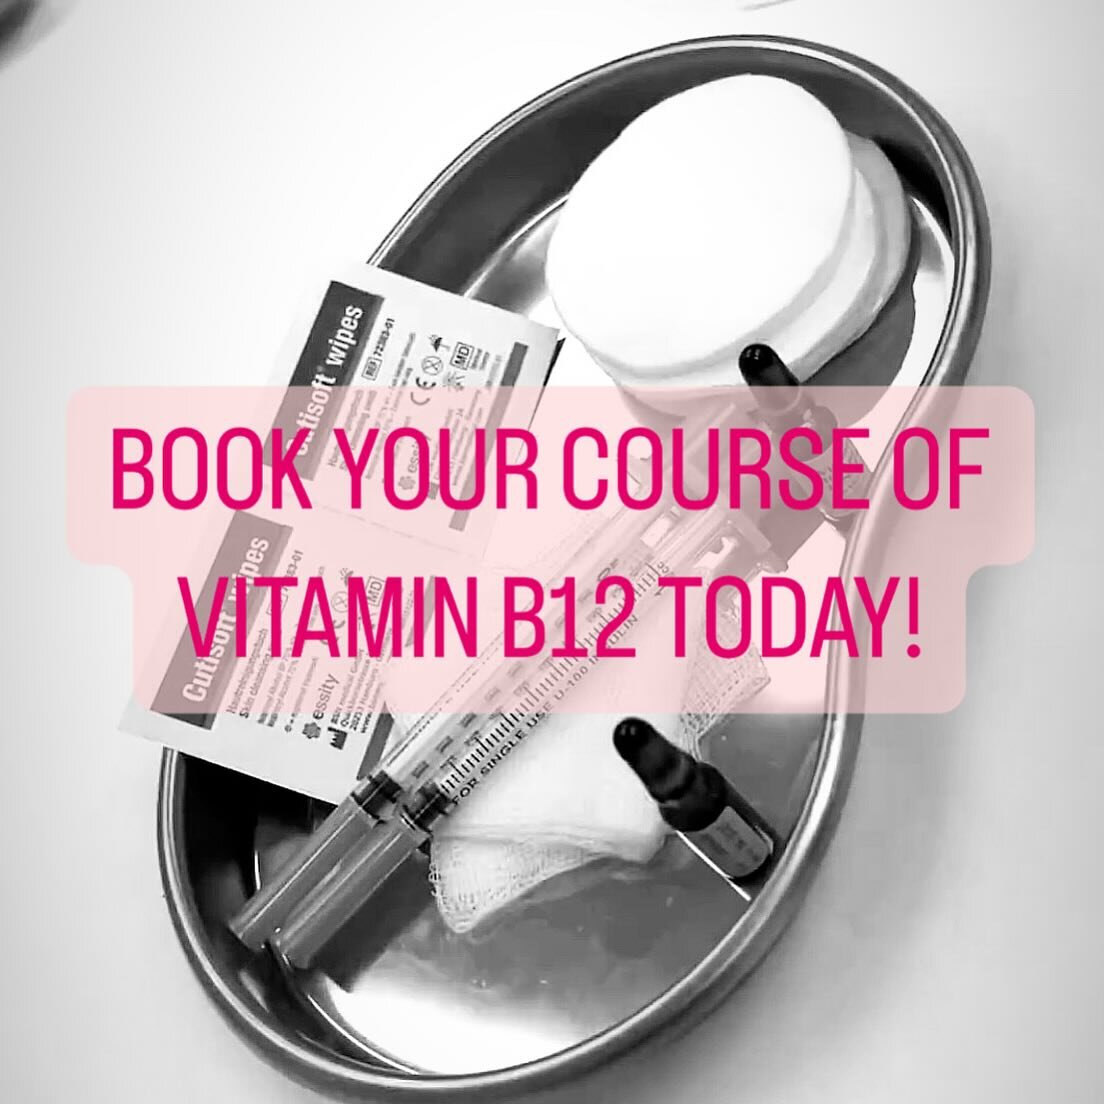 Boost your energy with a course of 4 Vitamin B12 shots! 💉 Book all 4 for just &pound;120&ndash; that&rsquo;s one shot free, usually &pound;40 per shot. Don&rsquo;t miss out, book now! ⚡️ #VitaminB12 #EnergyBoost #AprilOffer